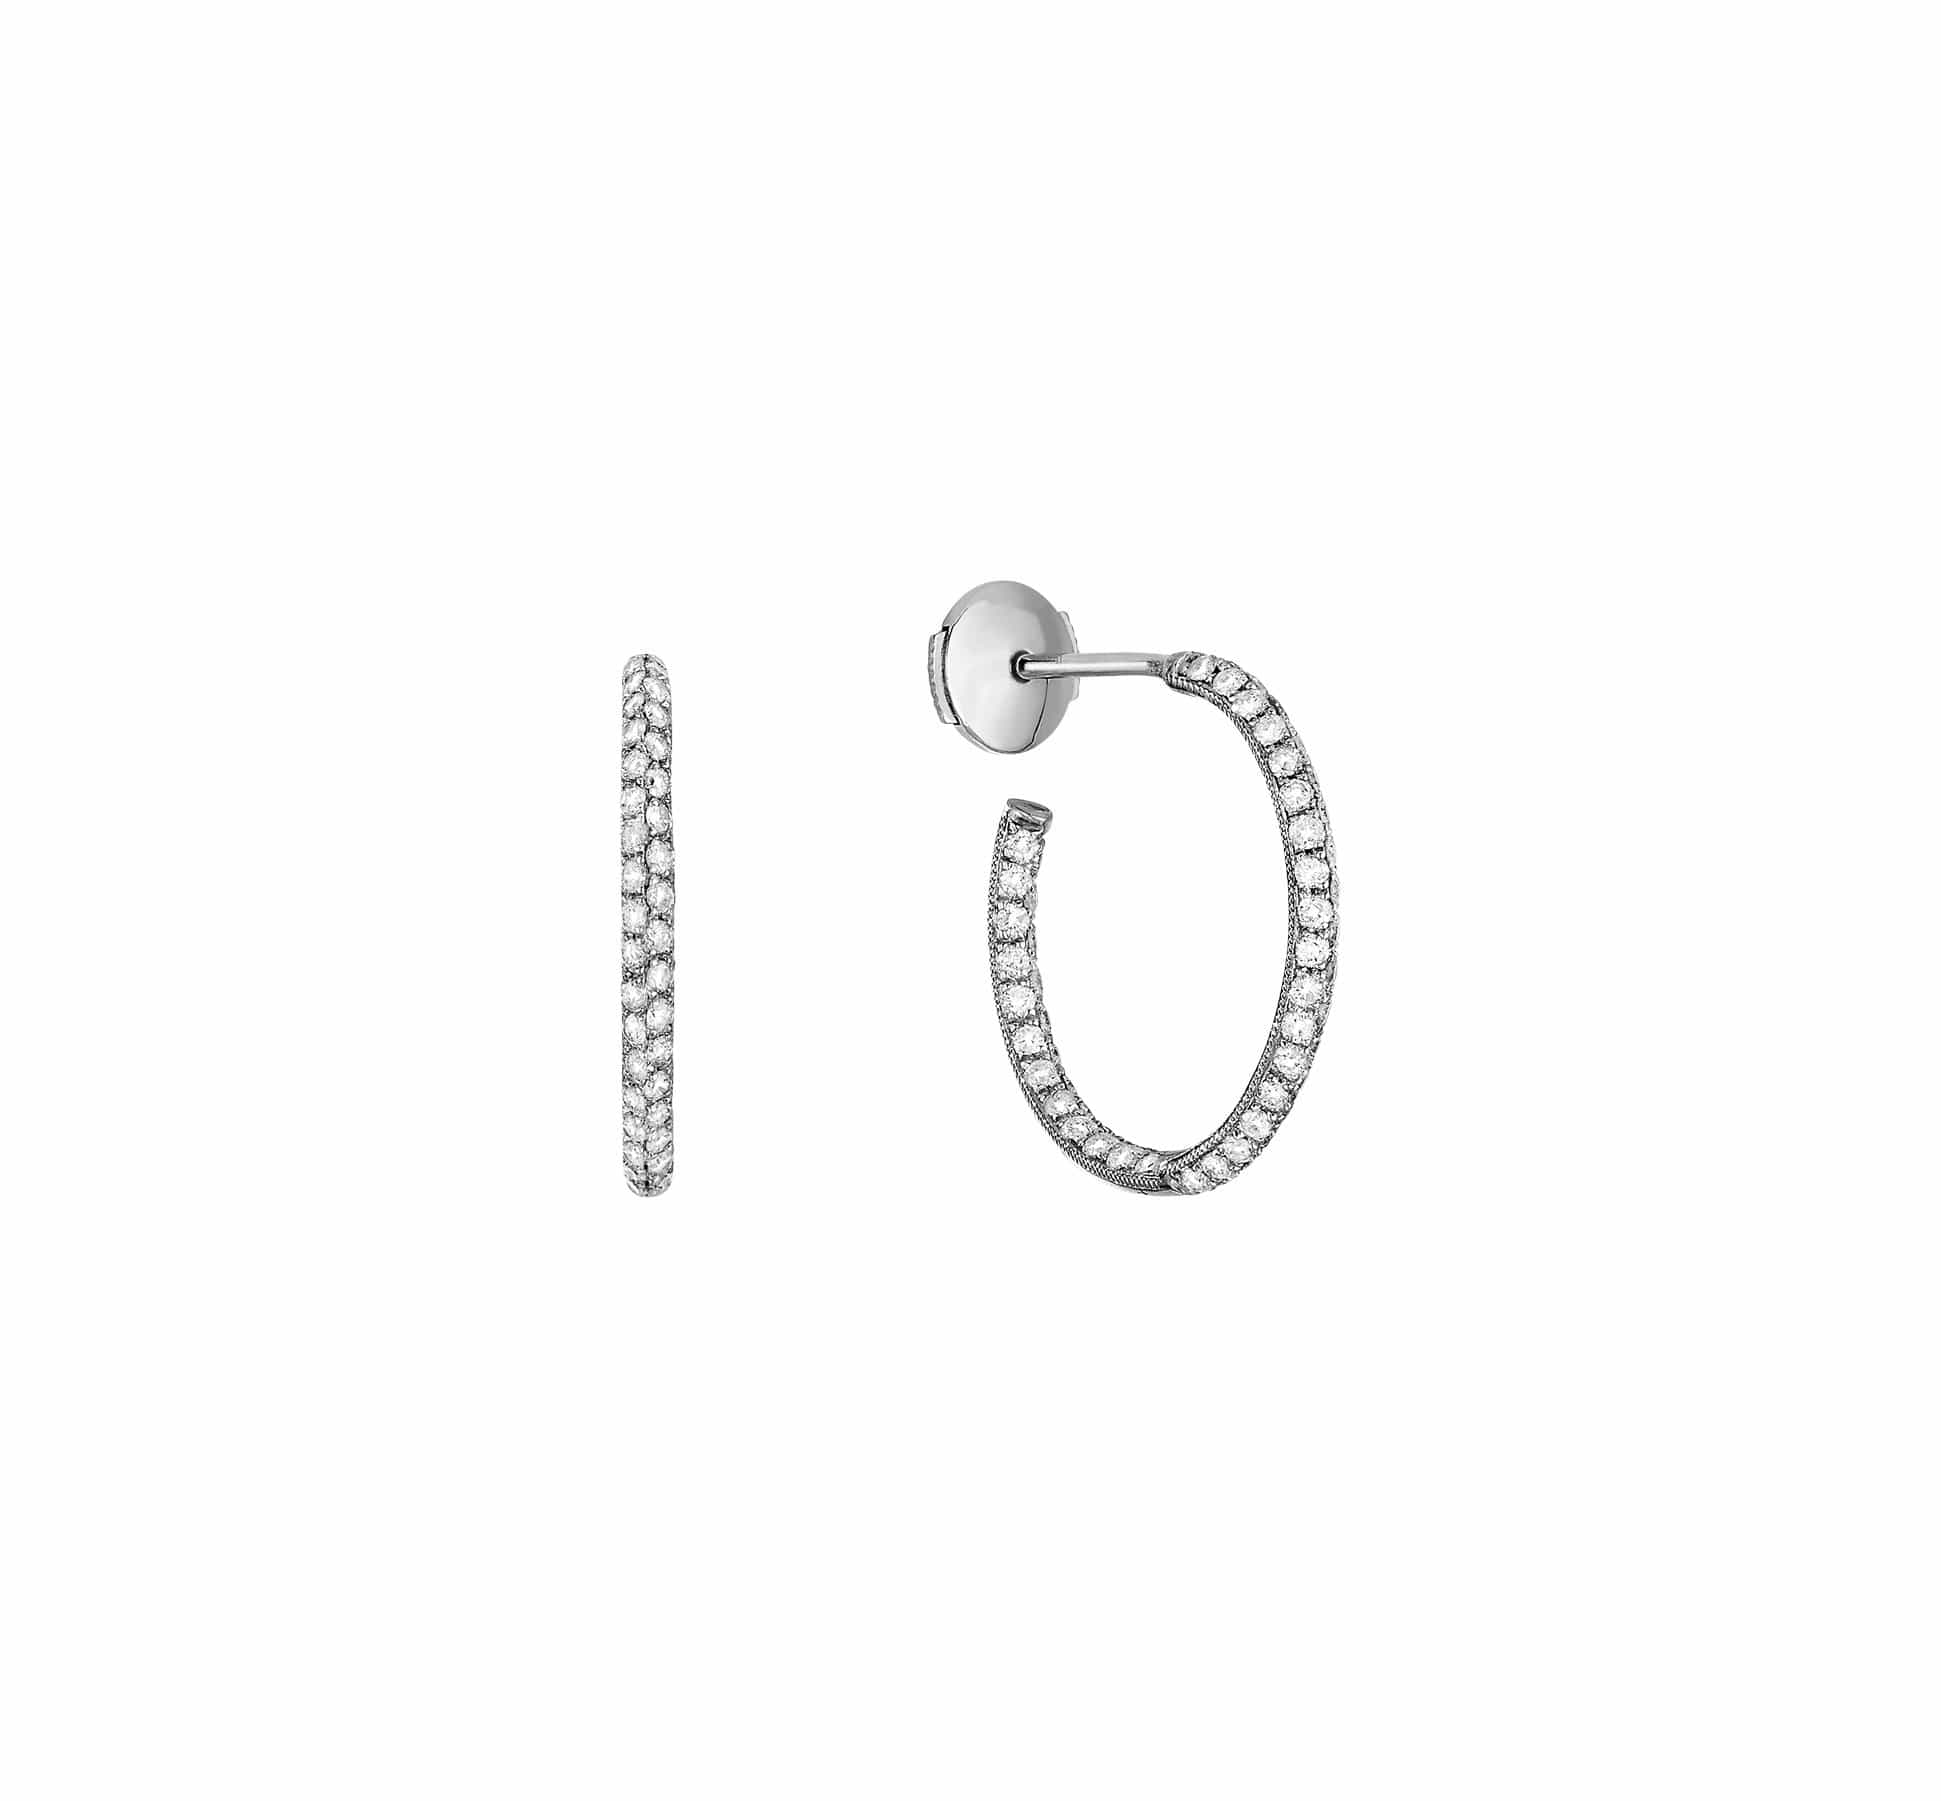 Bliss Gold and diamonds small hoops